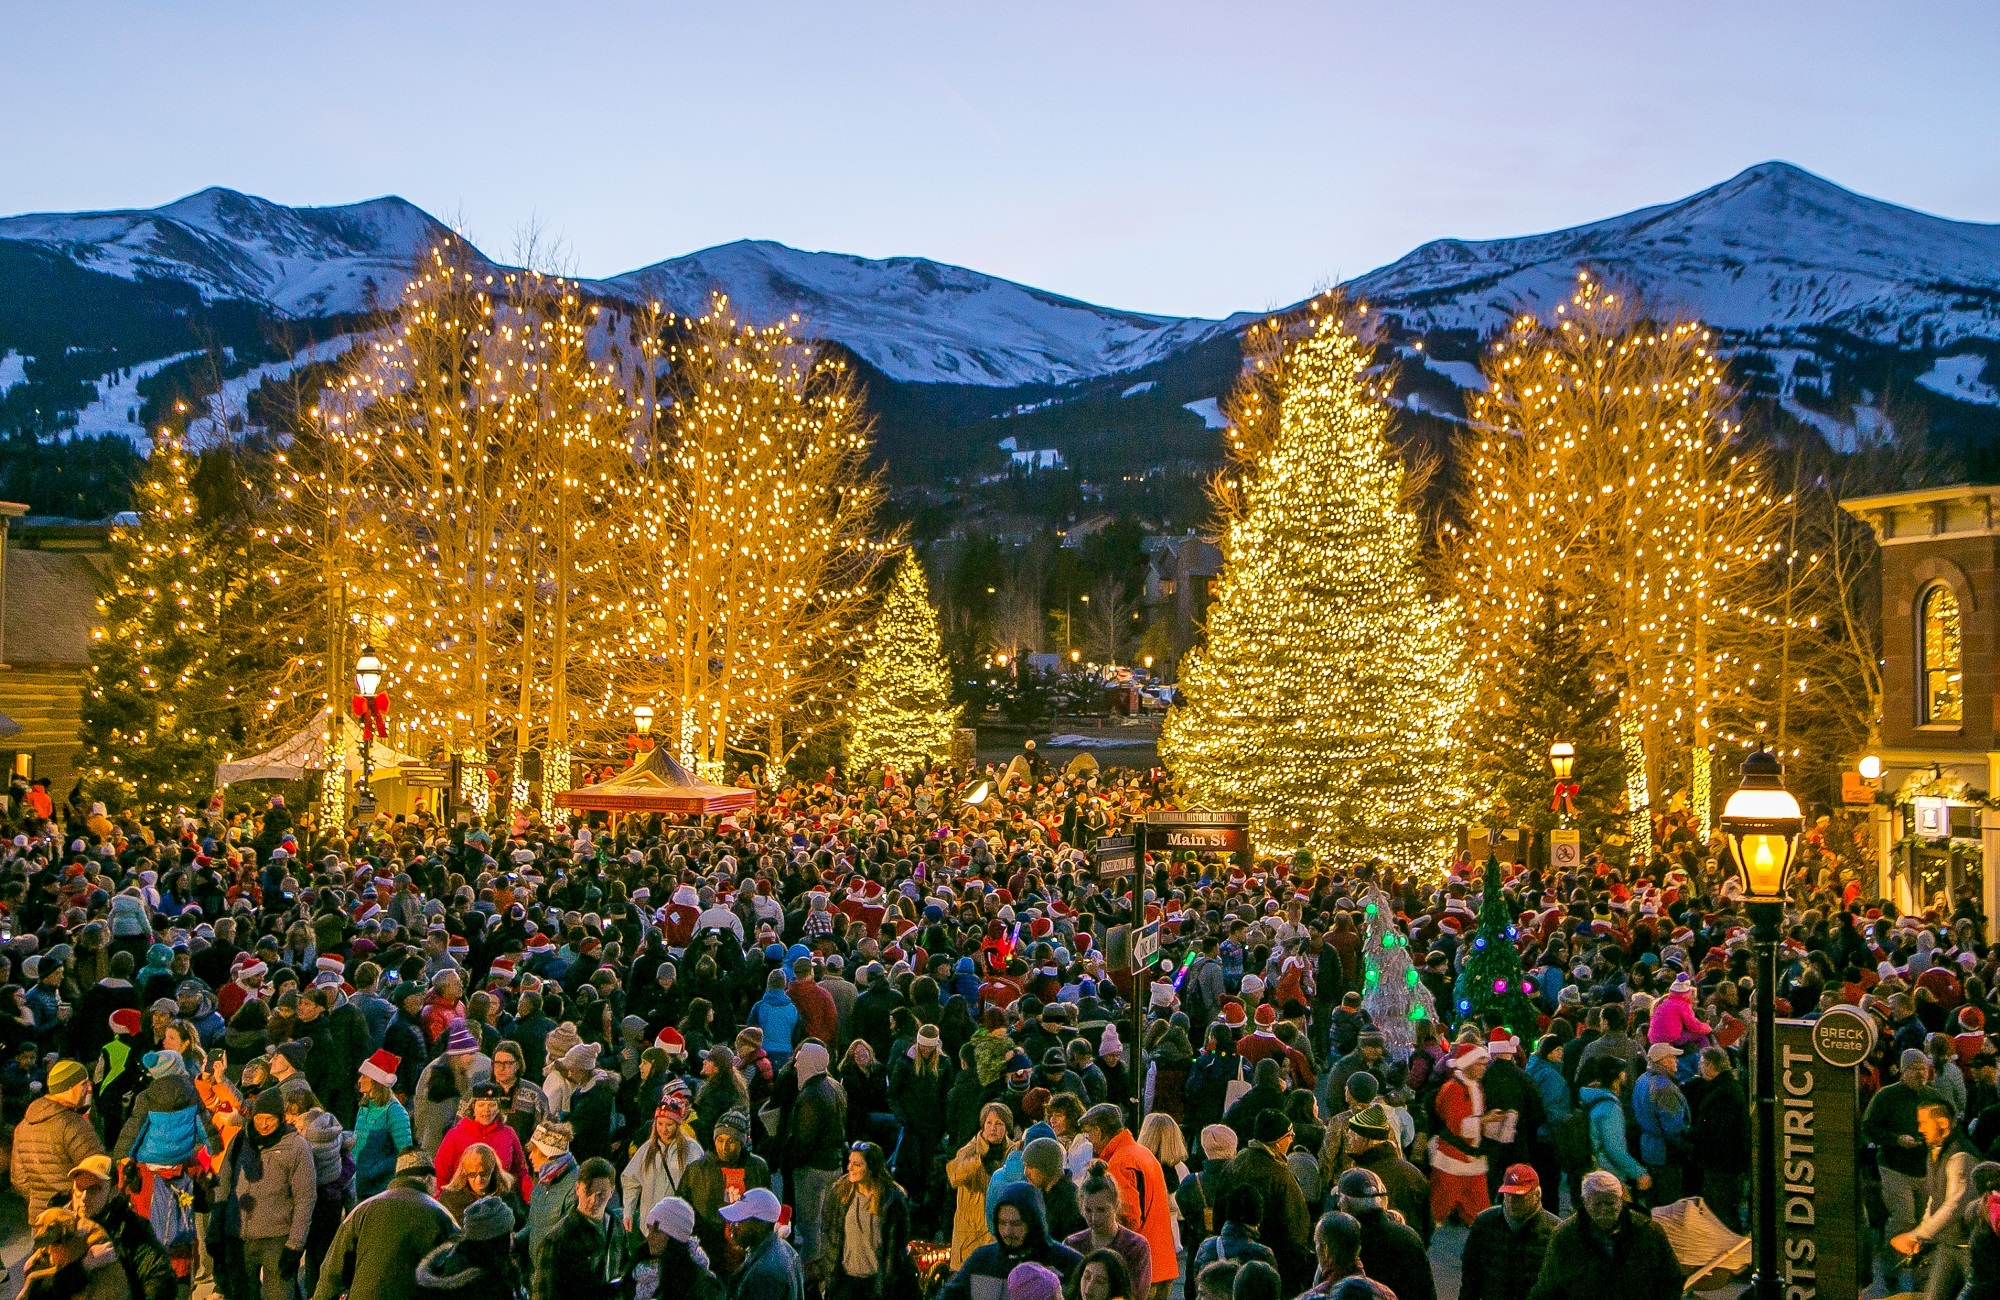 The 2023 Lighting of Breckenridge and Race of the Santas